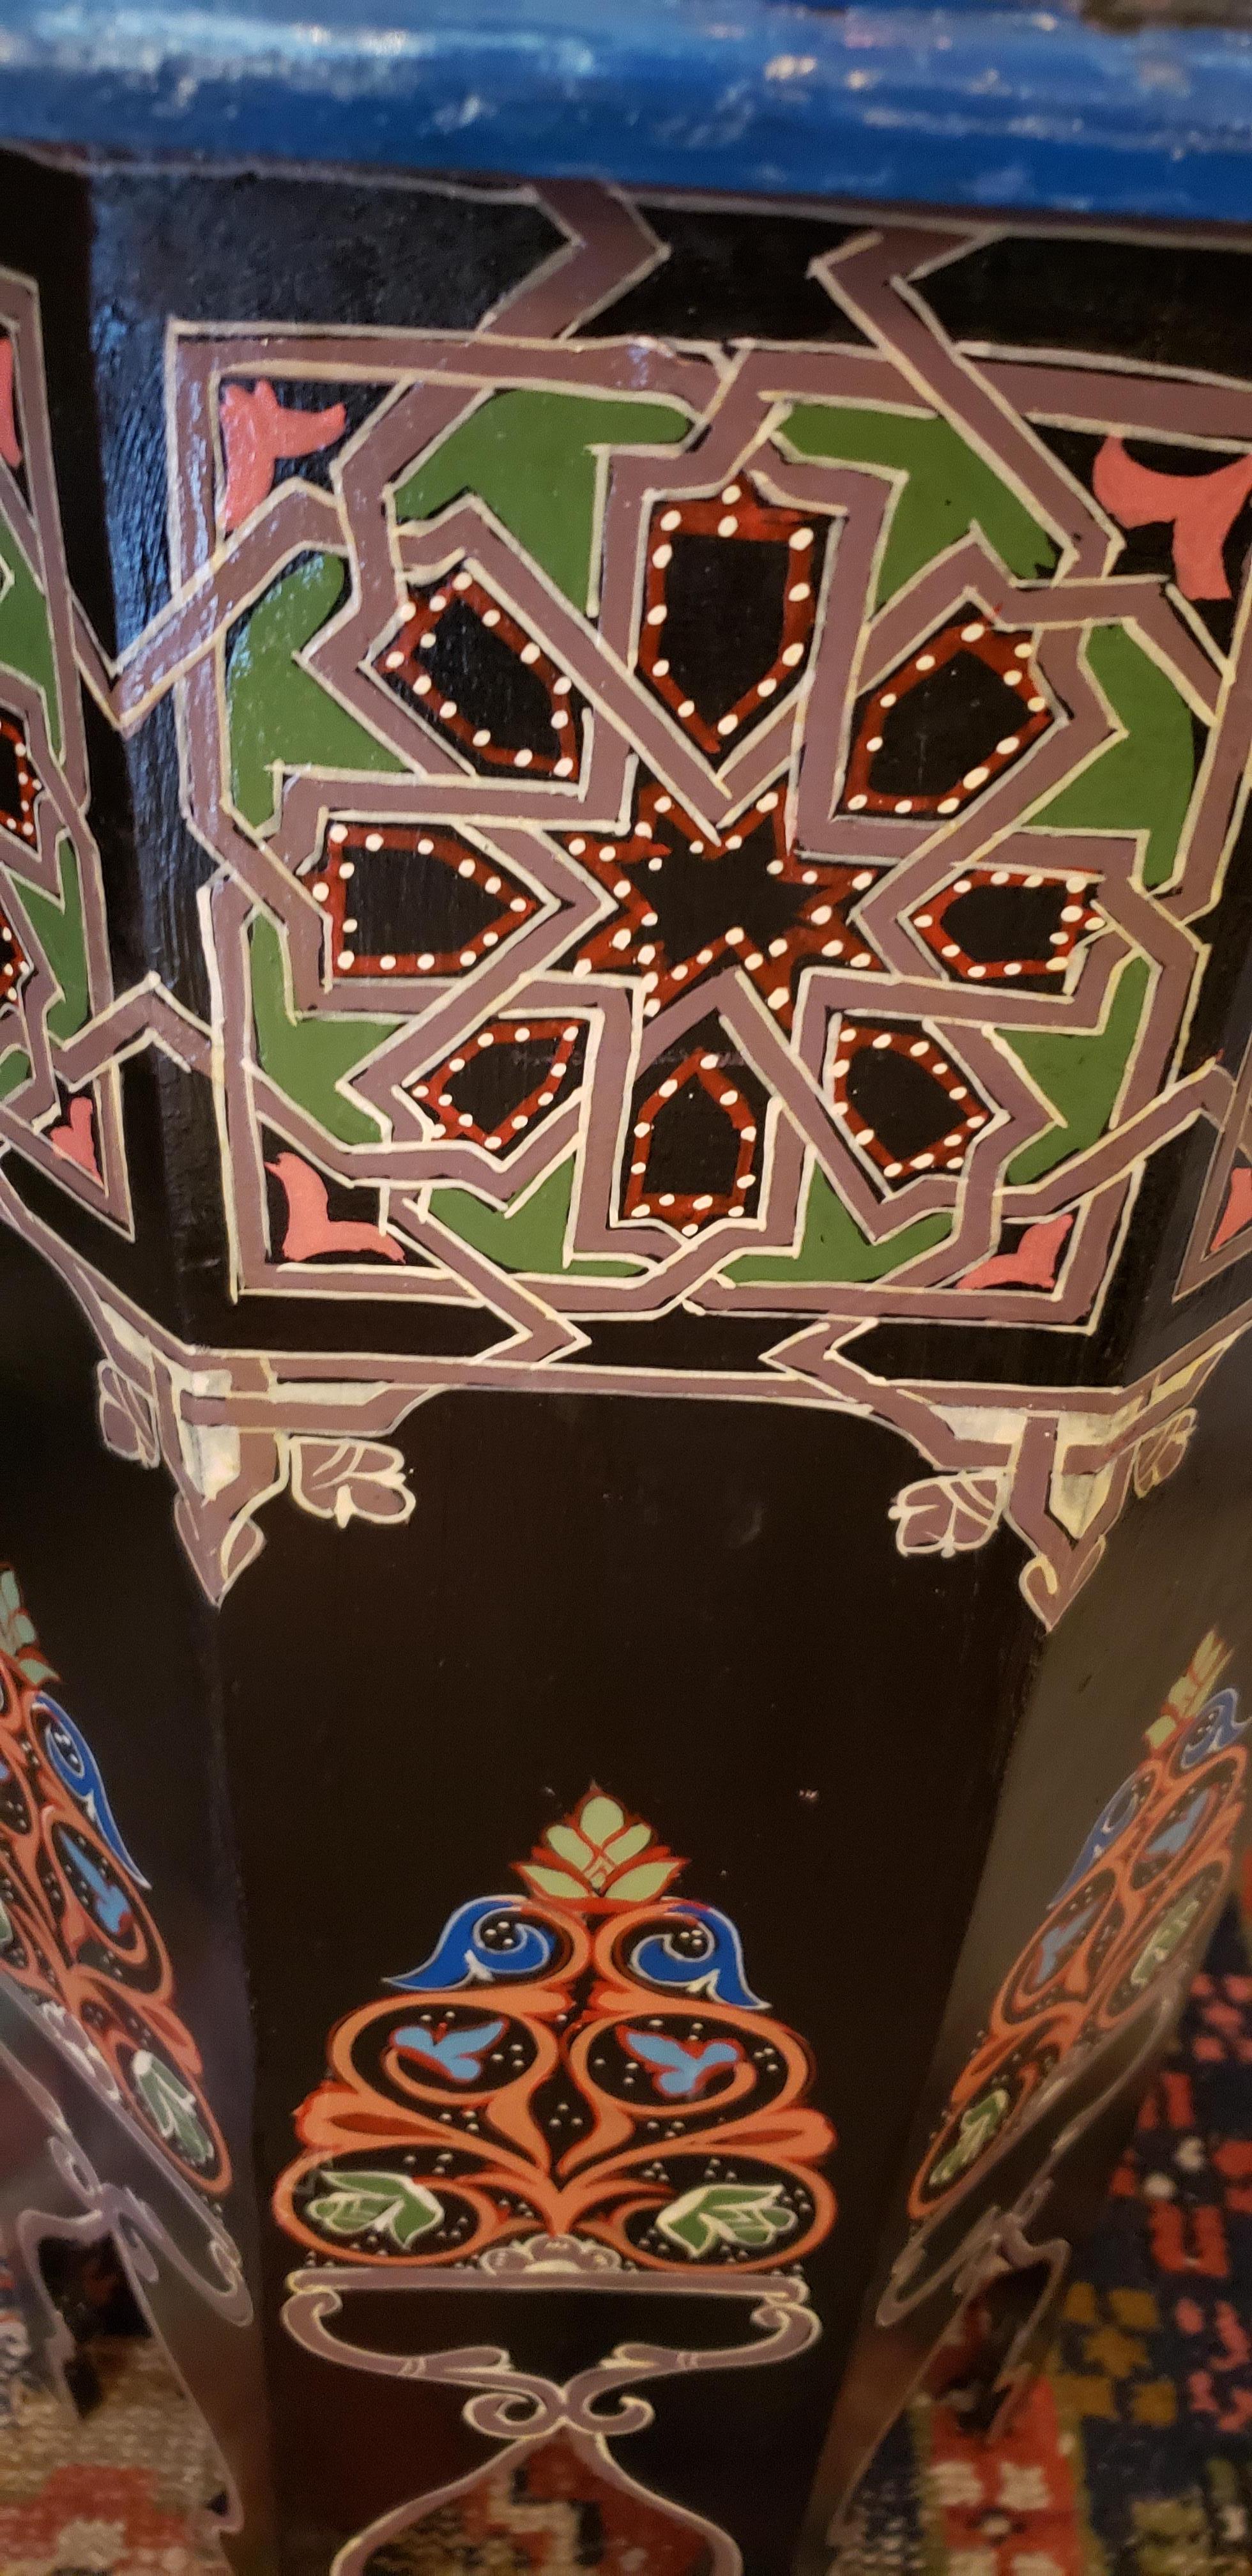 Rare find! 100% hand painted Moroccan octagonal shape side table. Great handcraftsmanship throughout. Beautiful add-on to your decor. This table measures approximately 28 inches in height, 16